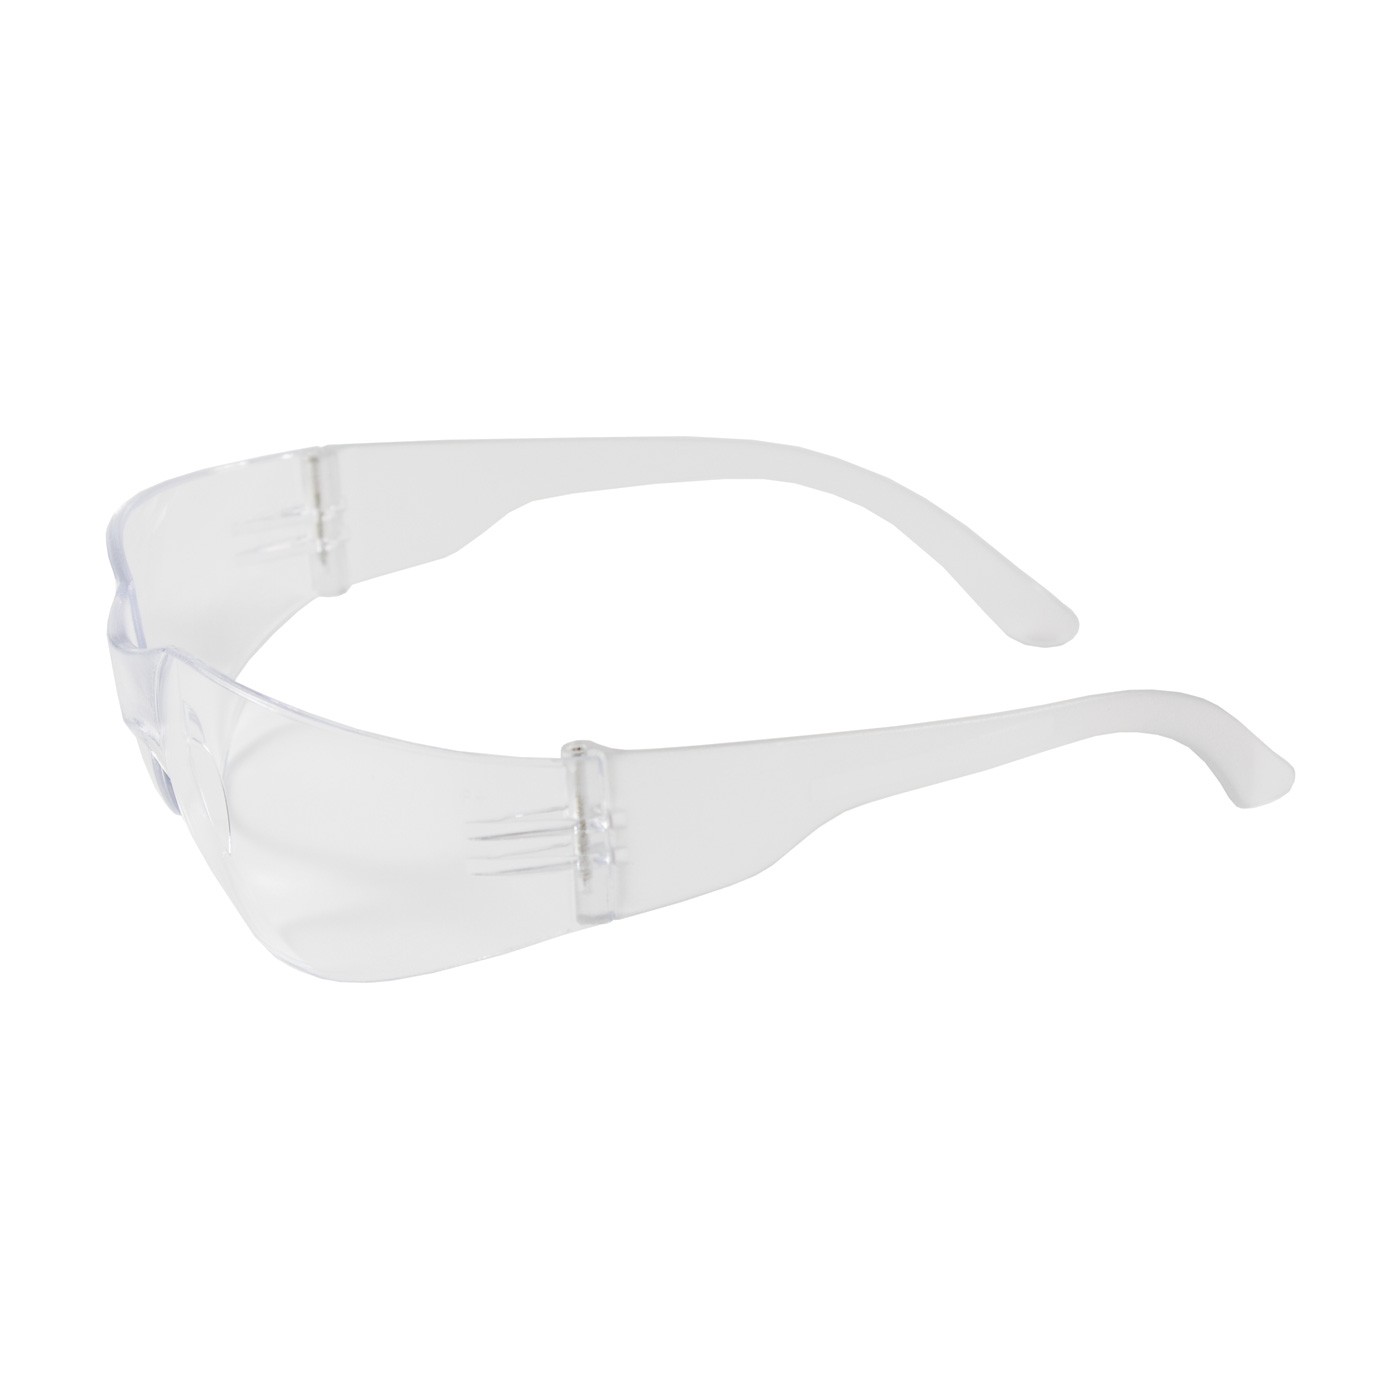 Zenon Z12™ Rimless Safety Glasses with Clear Temple, Clear Lens and Anti-Scratch / Anti-Fog Coating  (#250-01-0920)